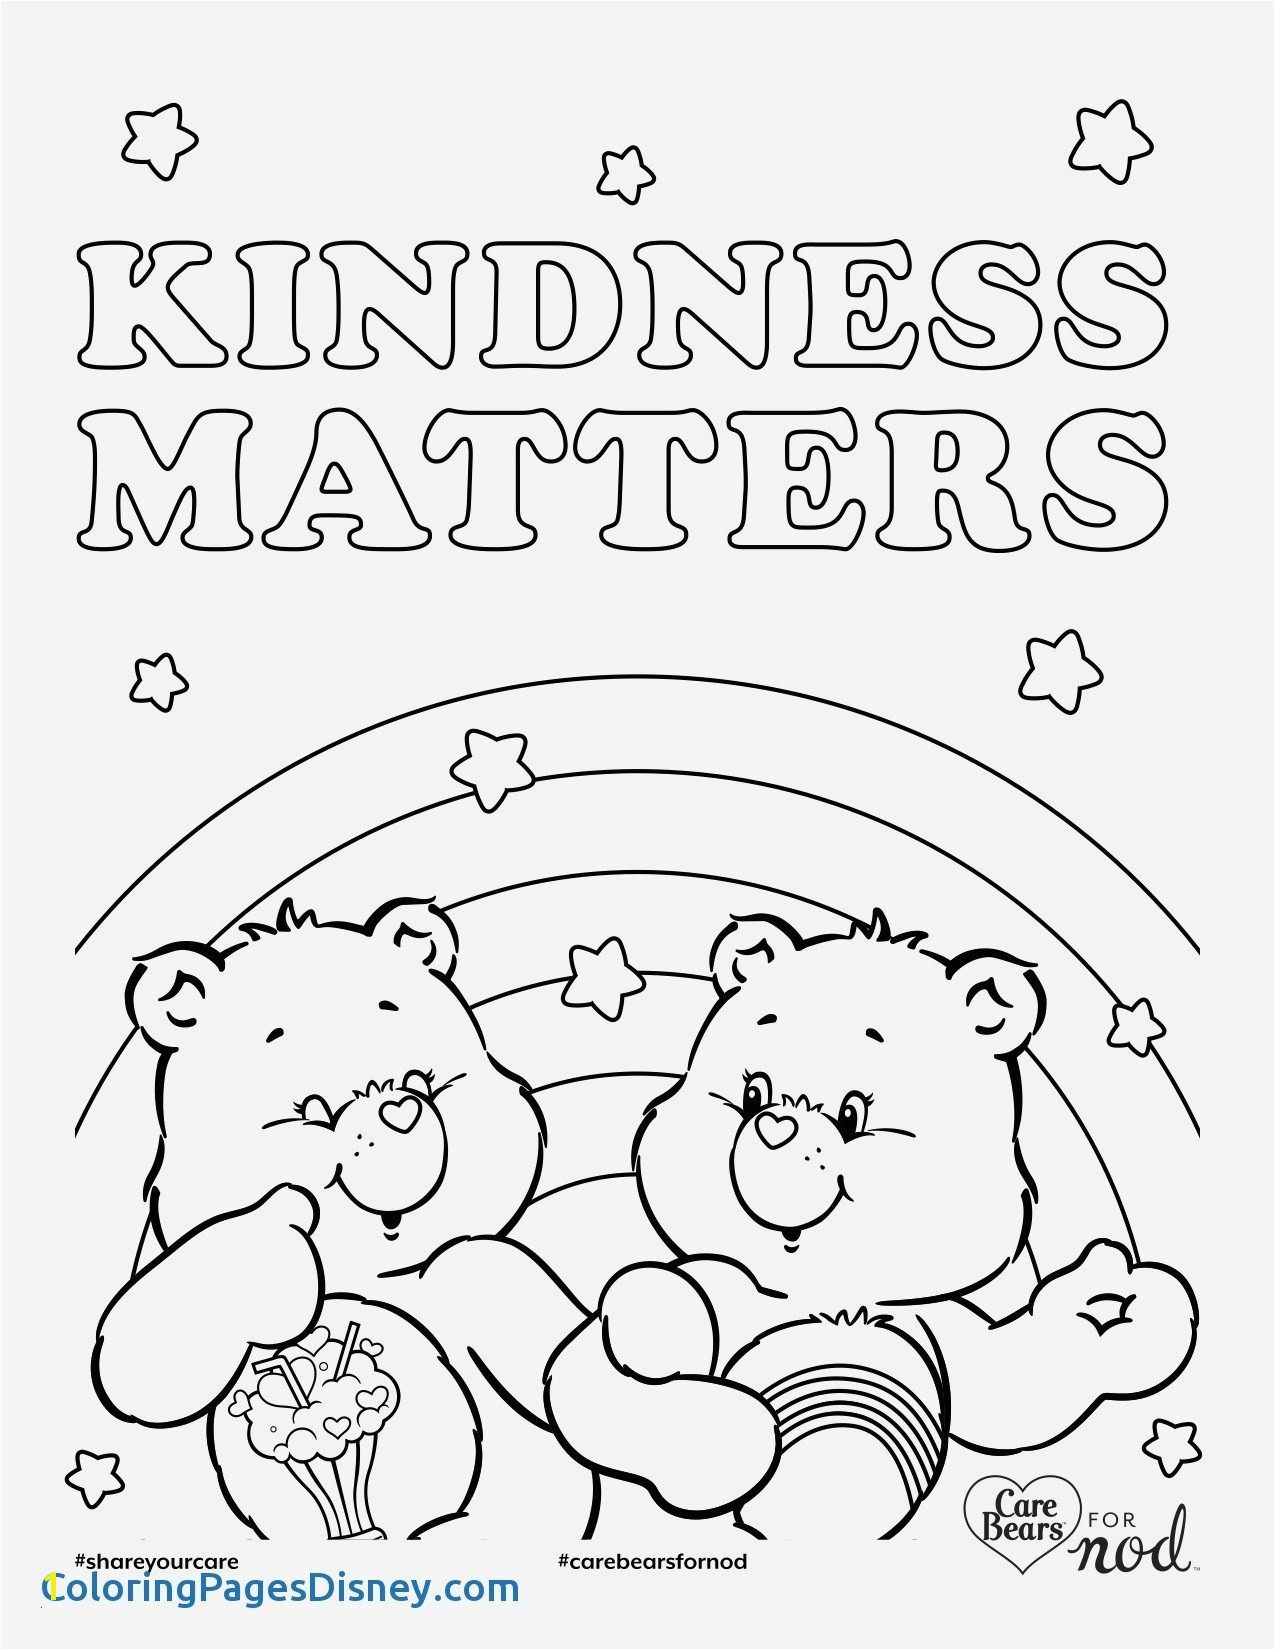 Mommy and Me Coloring Pages Polar Bear Coloring Pages Sample thephotosync